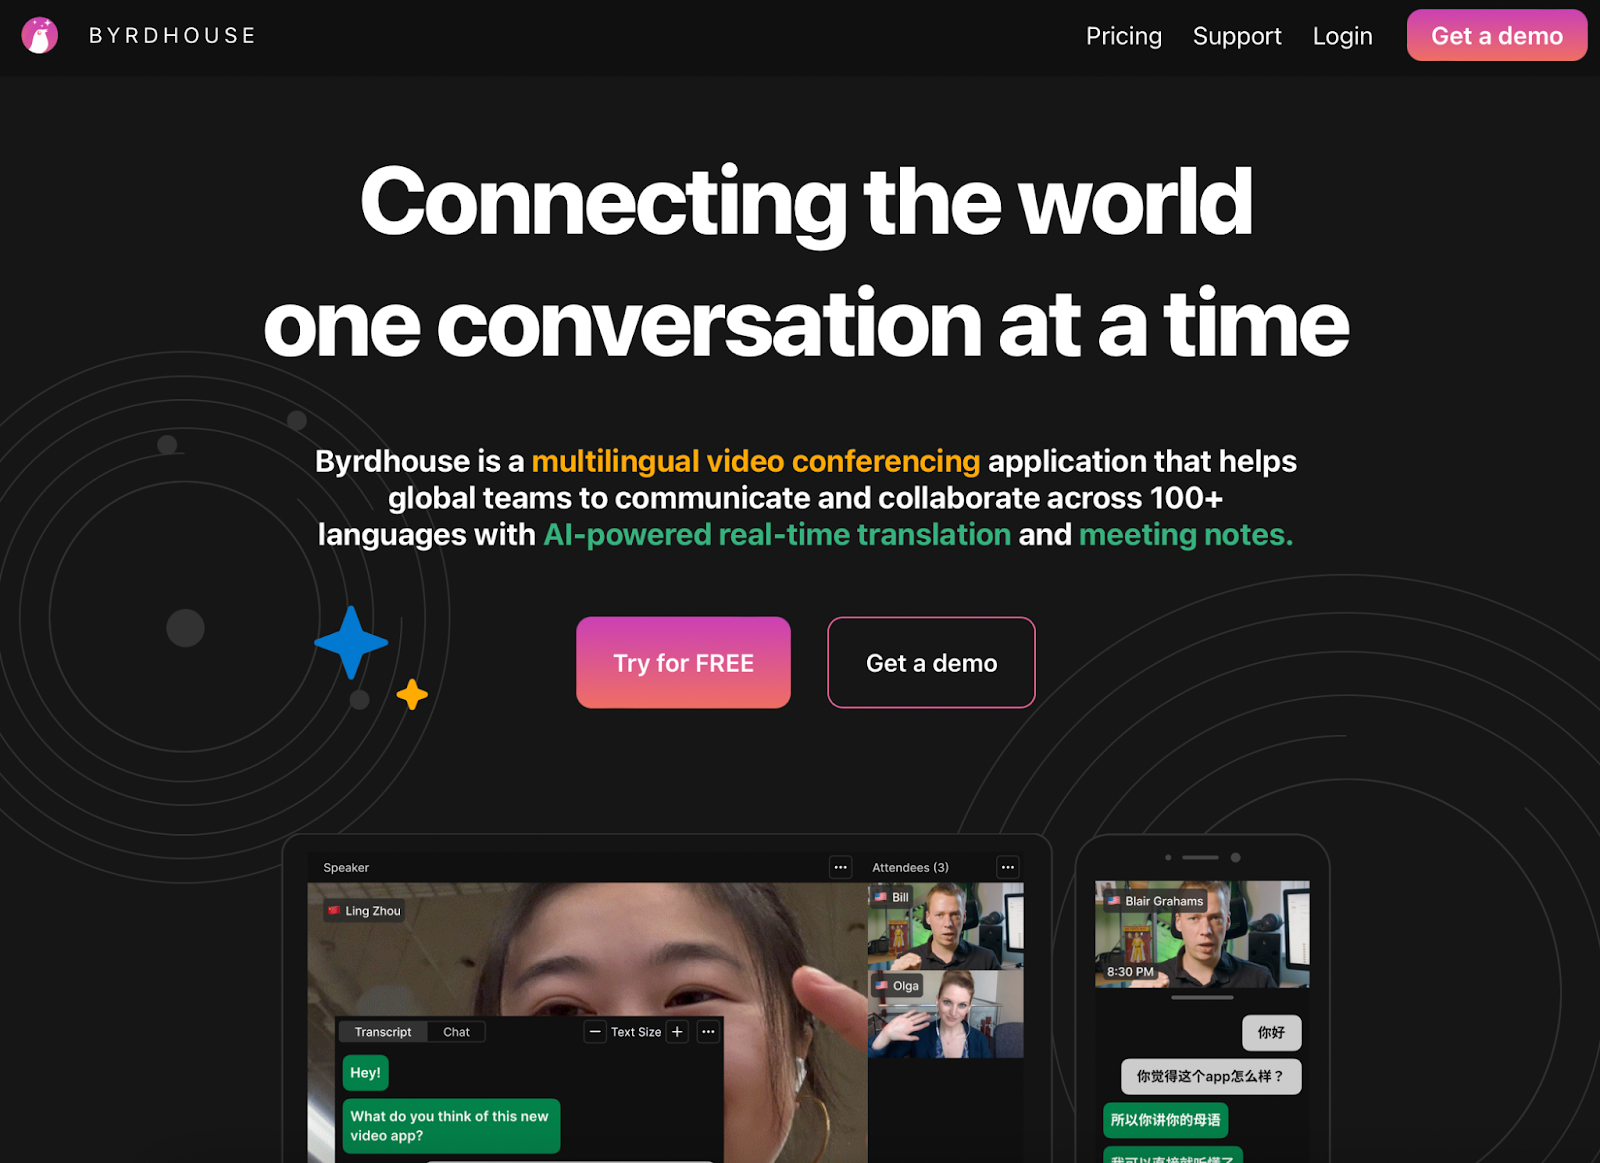 Byrdhouse is a multilingual video conferencing app